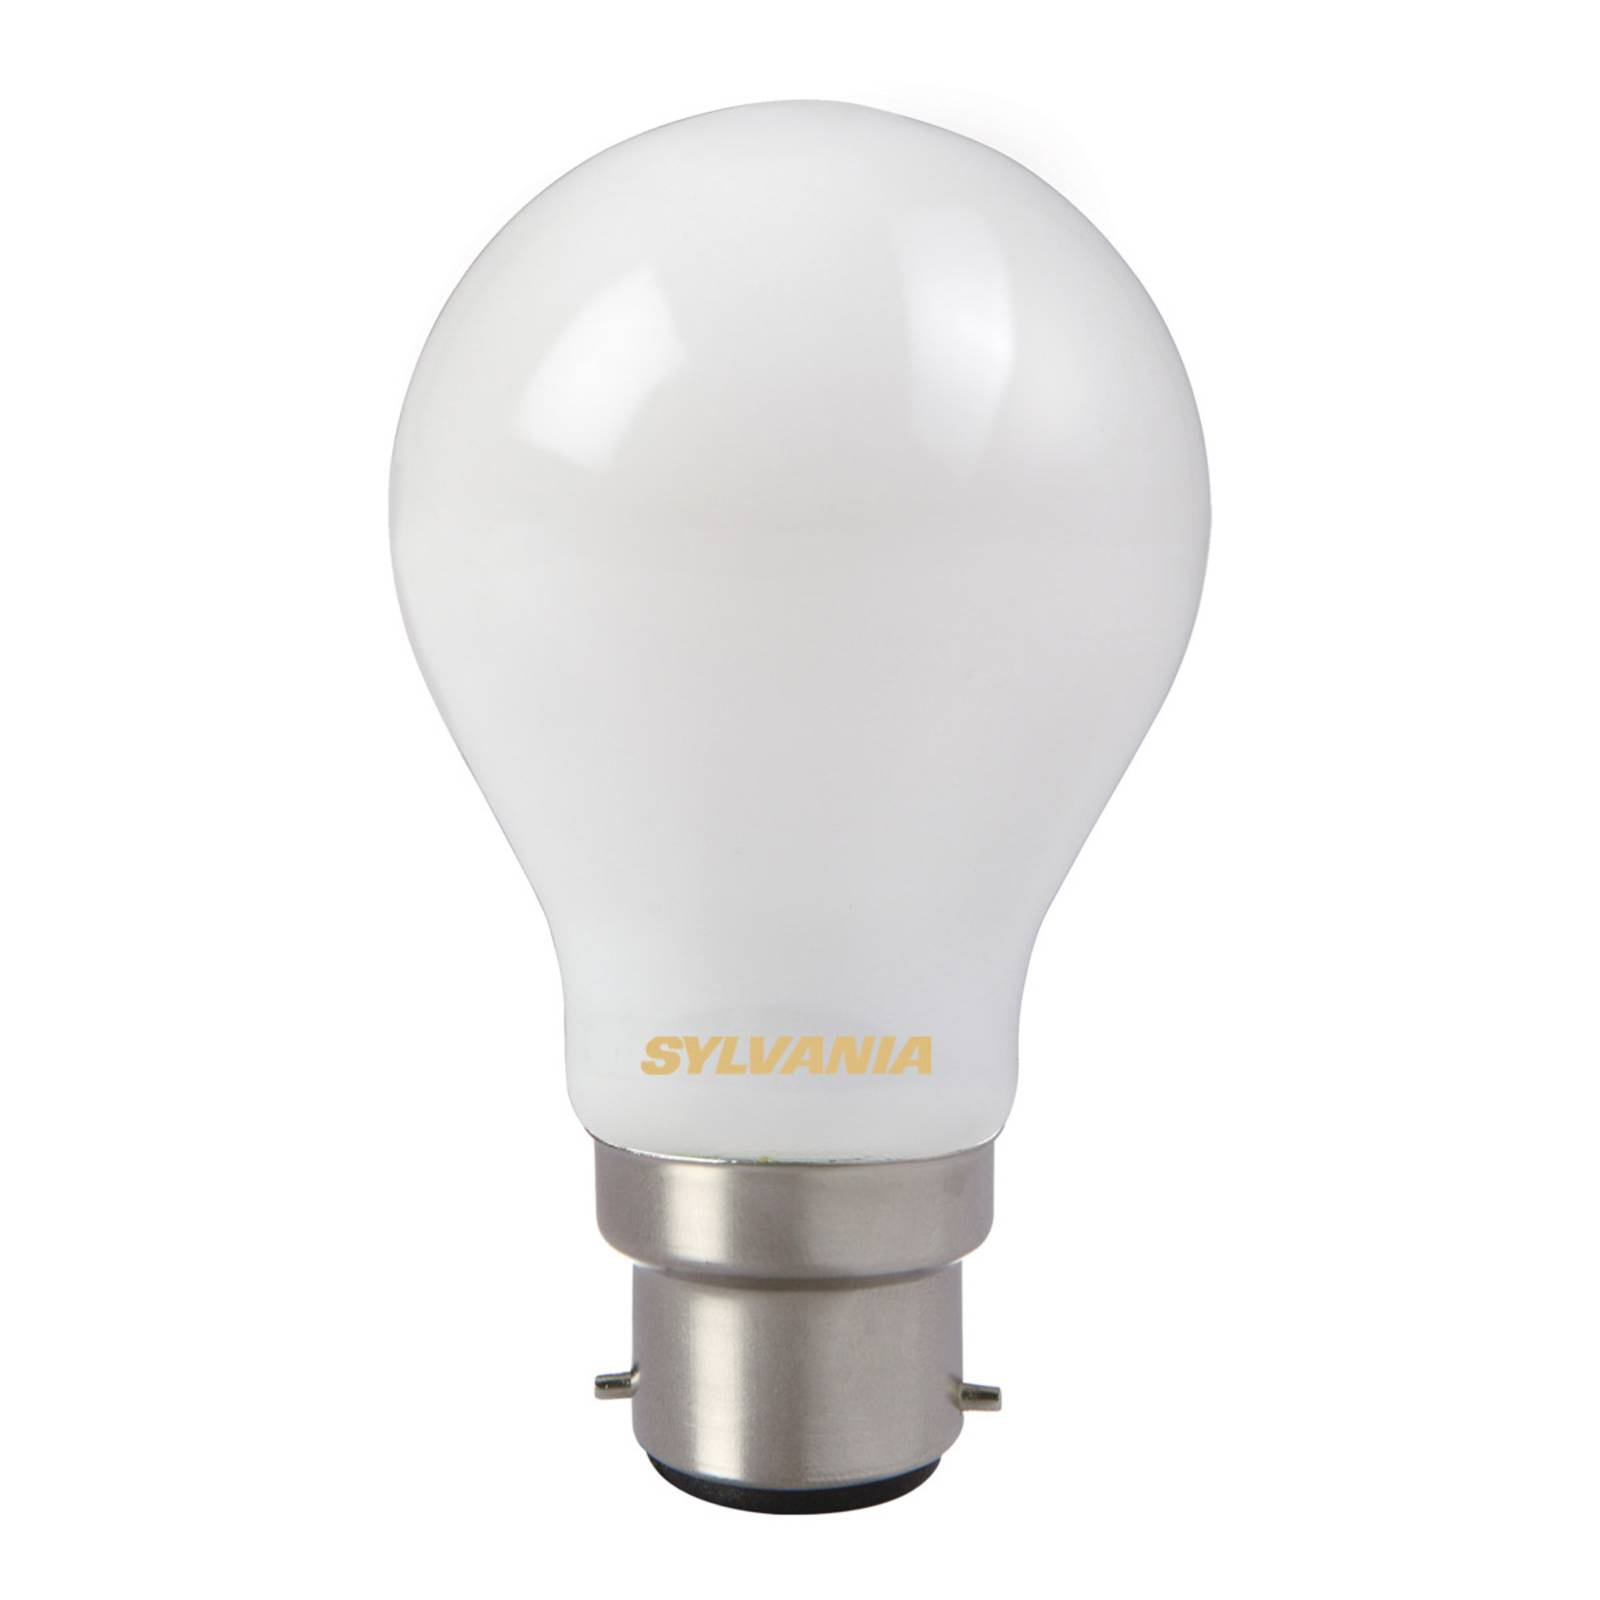 Image of Sylvania Ampoule LED, B22, 7 W, 827, satinée, non dimmable 5410288273105